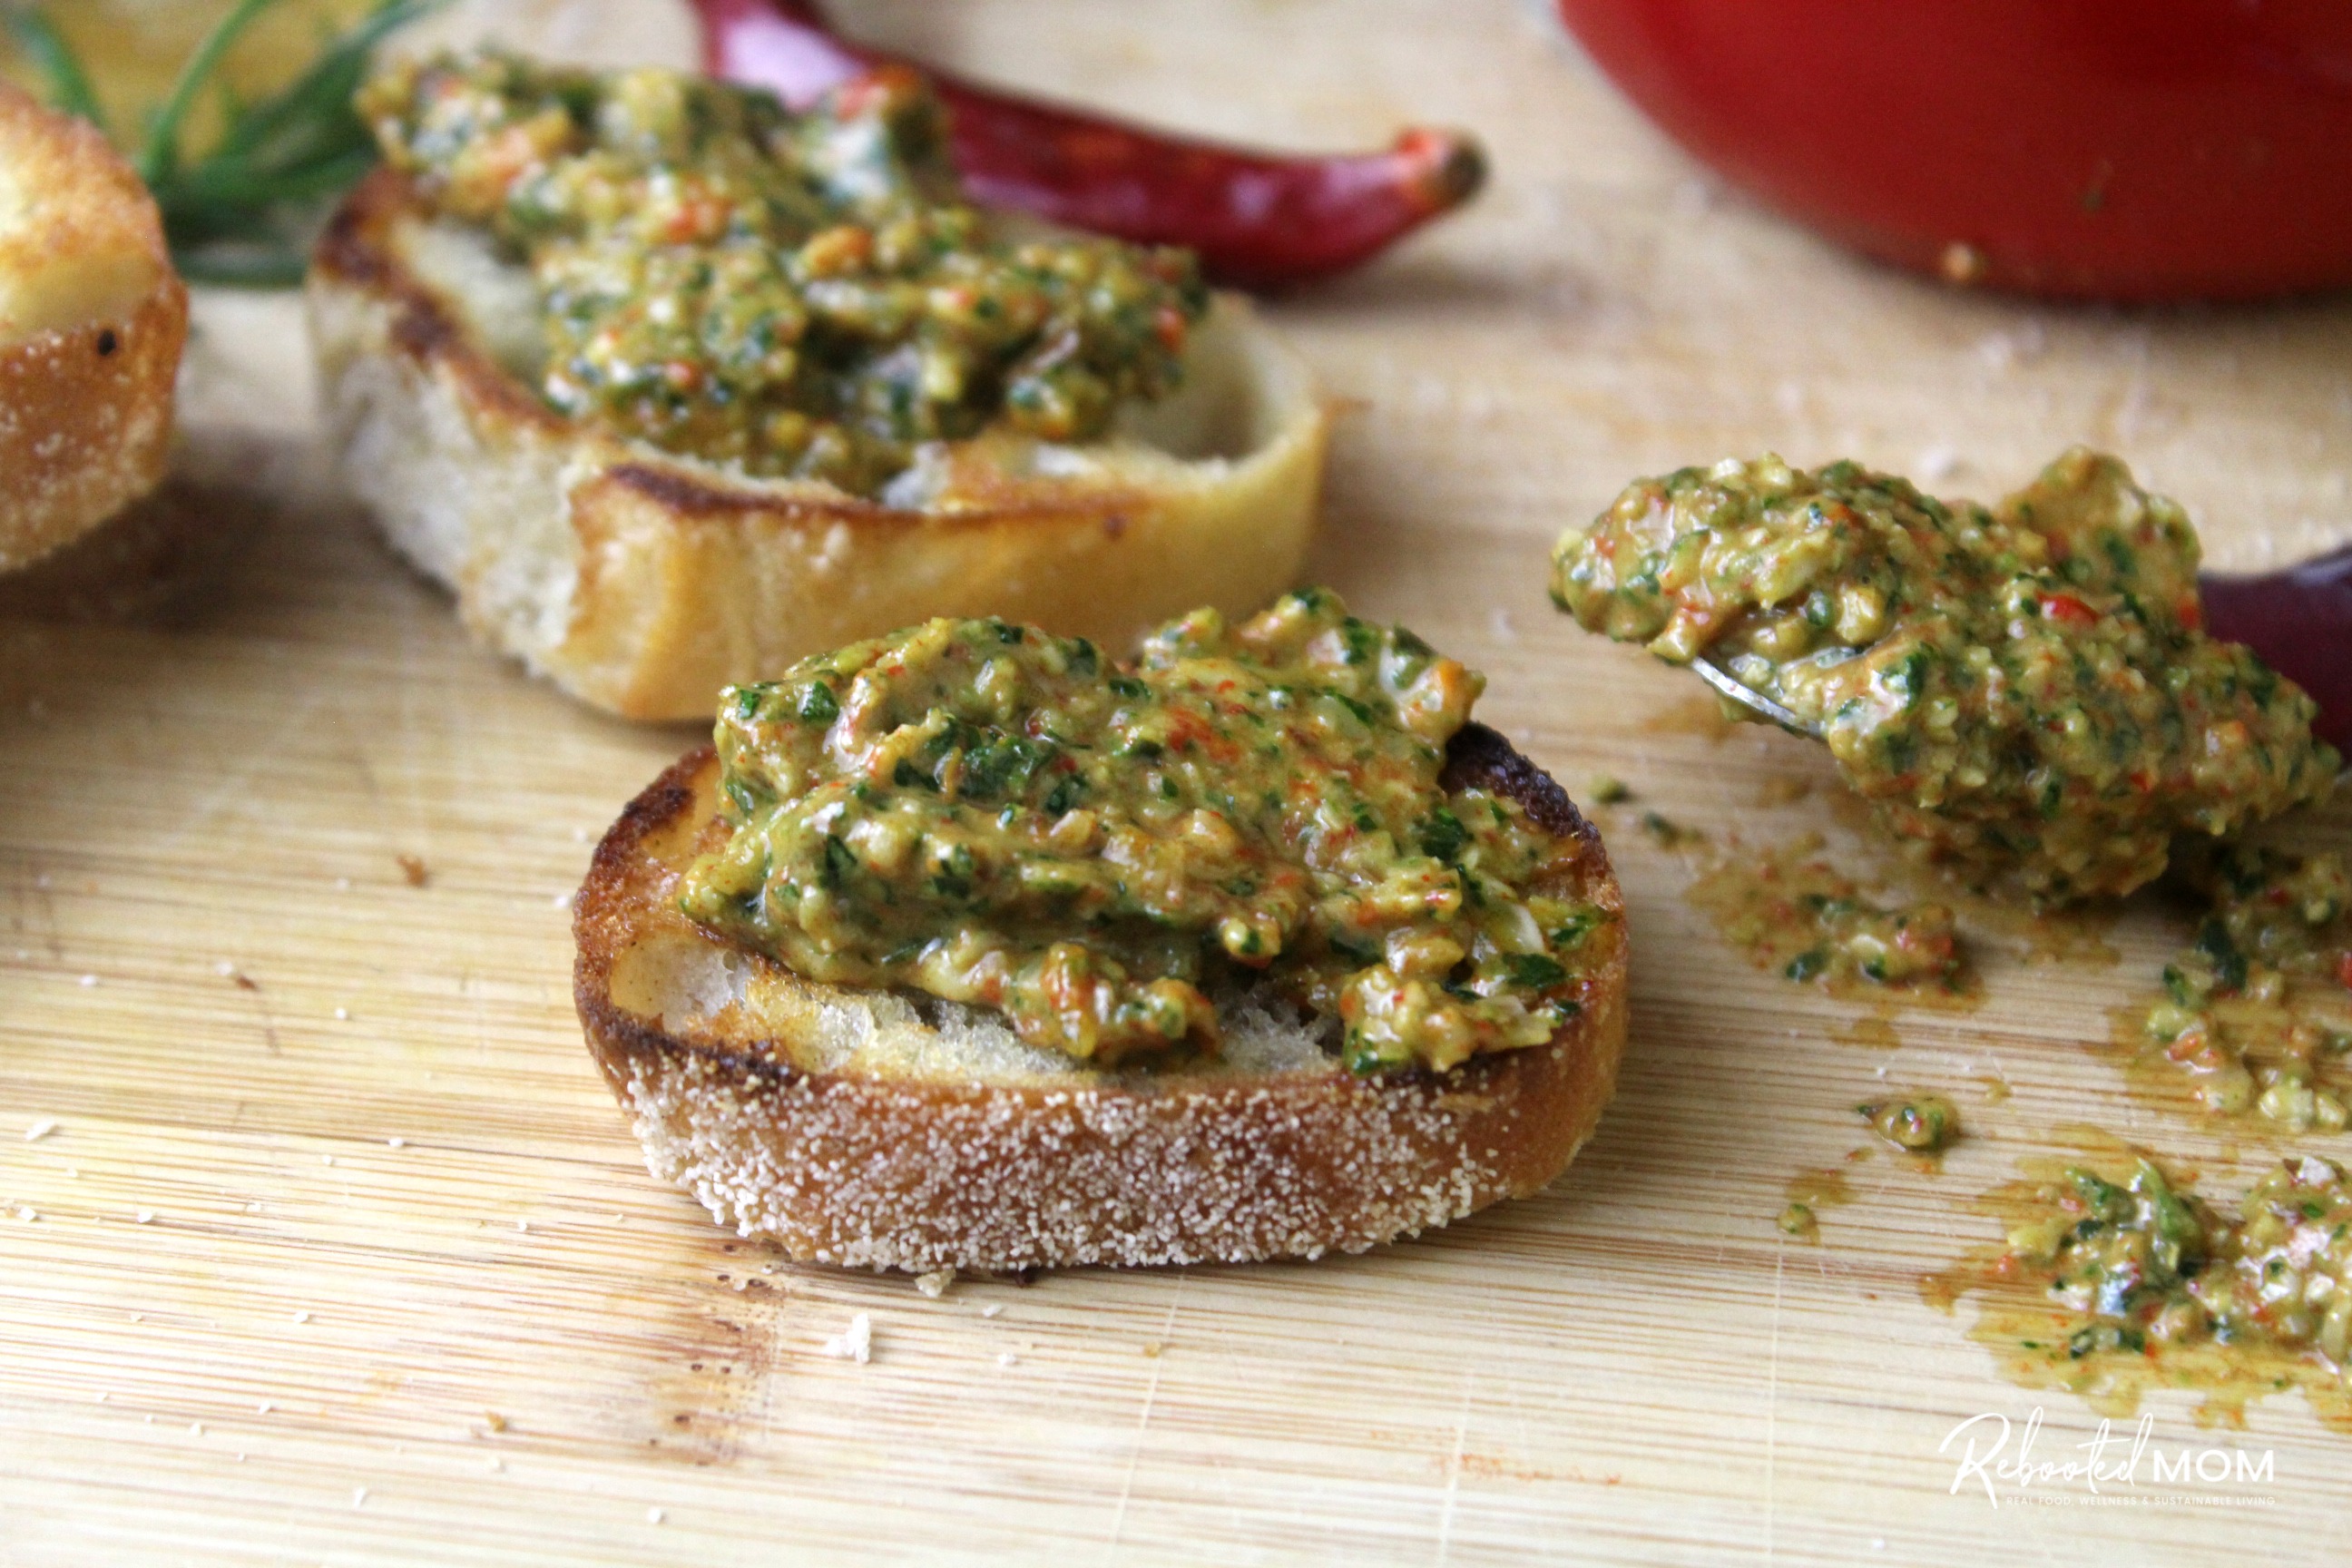 Roasted Fresno Pepper Pesto spread on a toasted baguette